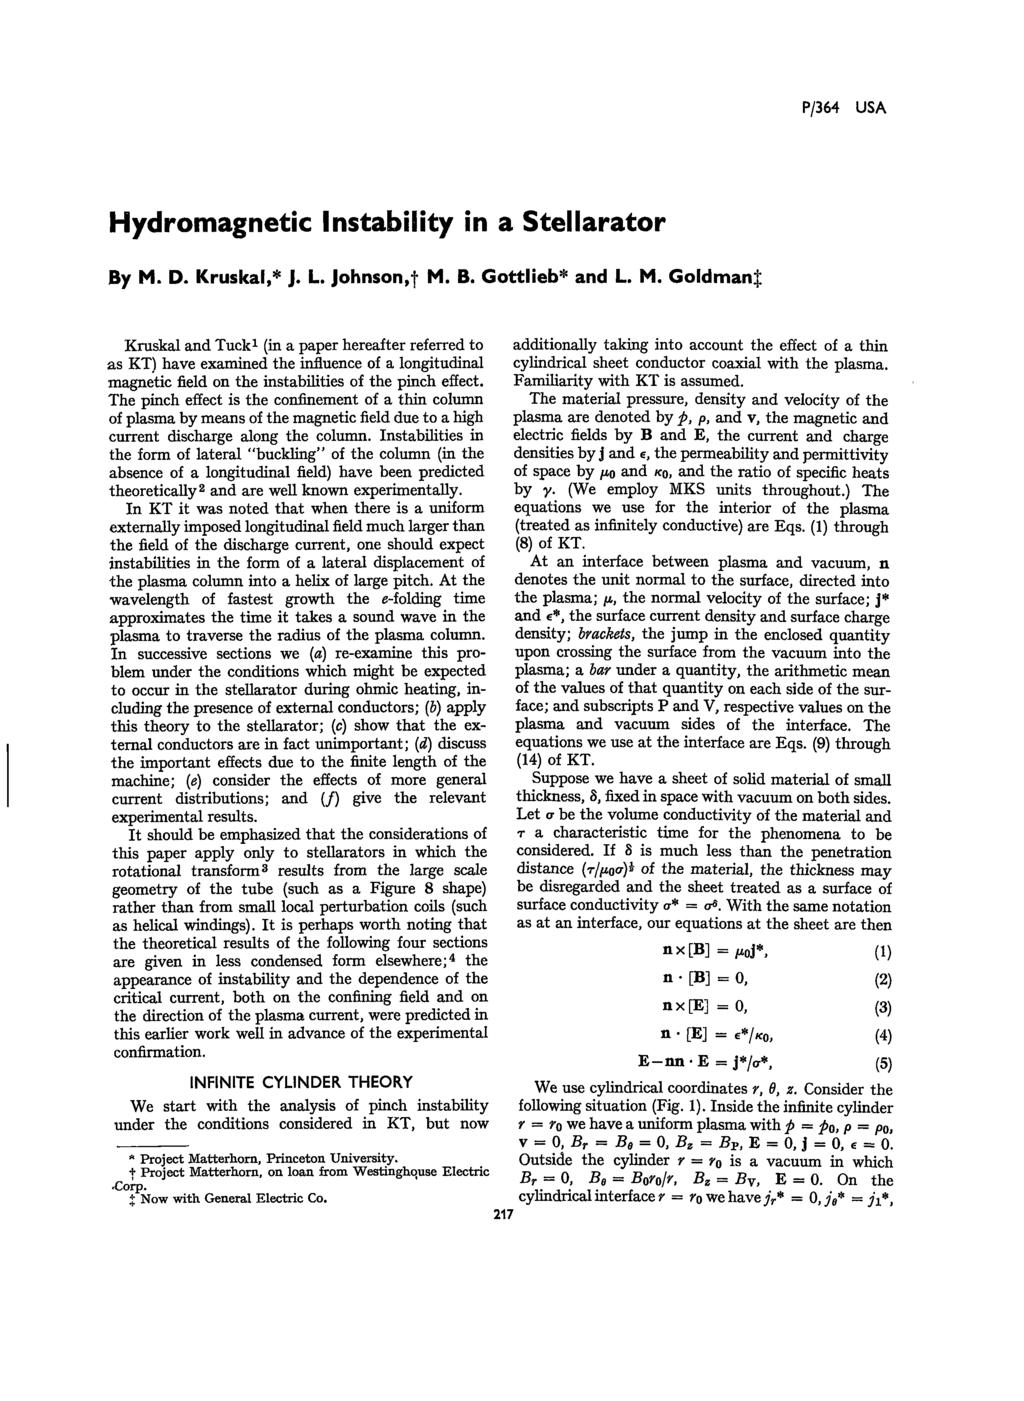 P/364 USA Hydromagnetic Instability in a Stellarator By M.